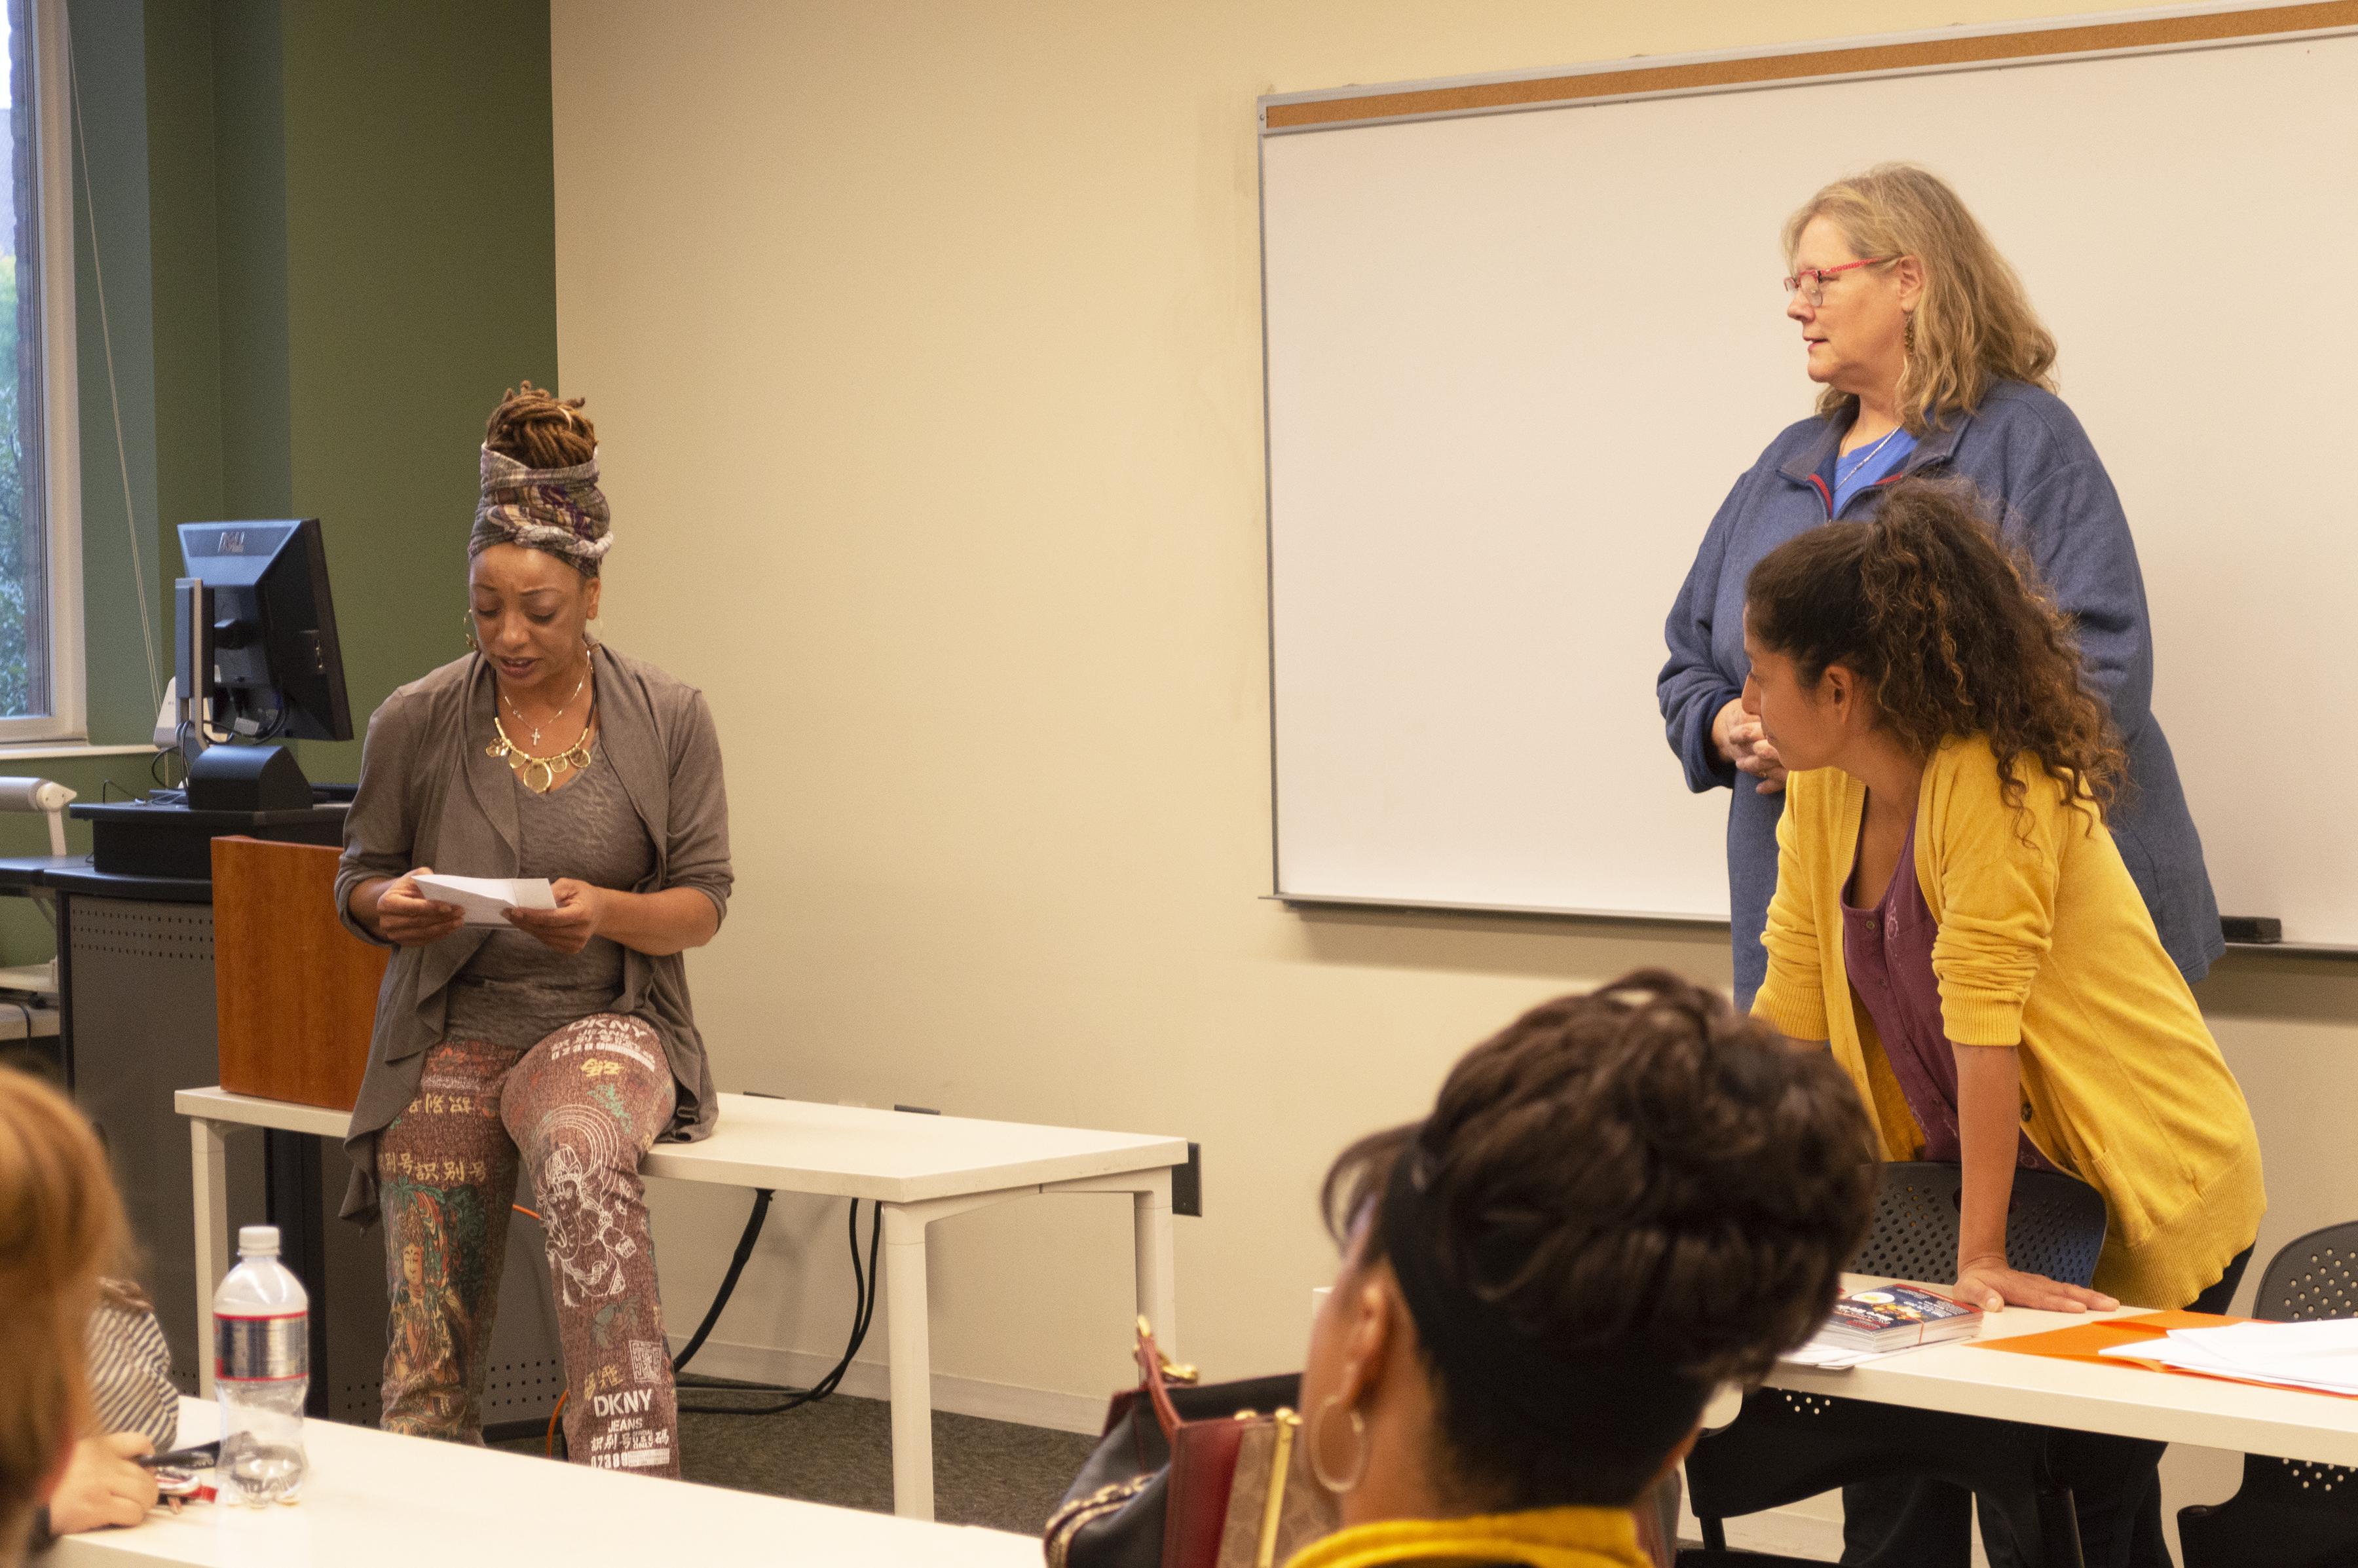 Students from the Masters in Advocacy and Political Leadership program read monologues from the play “Escaped Alone” on September 13. Students used the readings to discuss their own reactions and feelings about the themes expressed. (Mandy Hathaway / The Metropolitan)